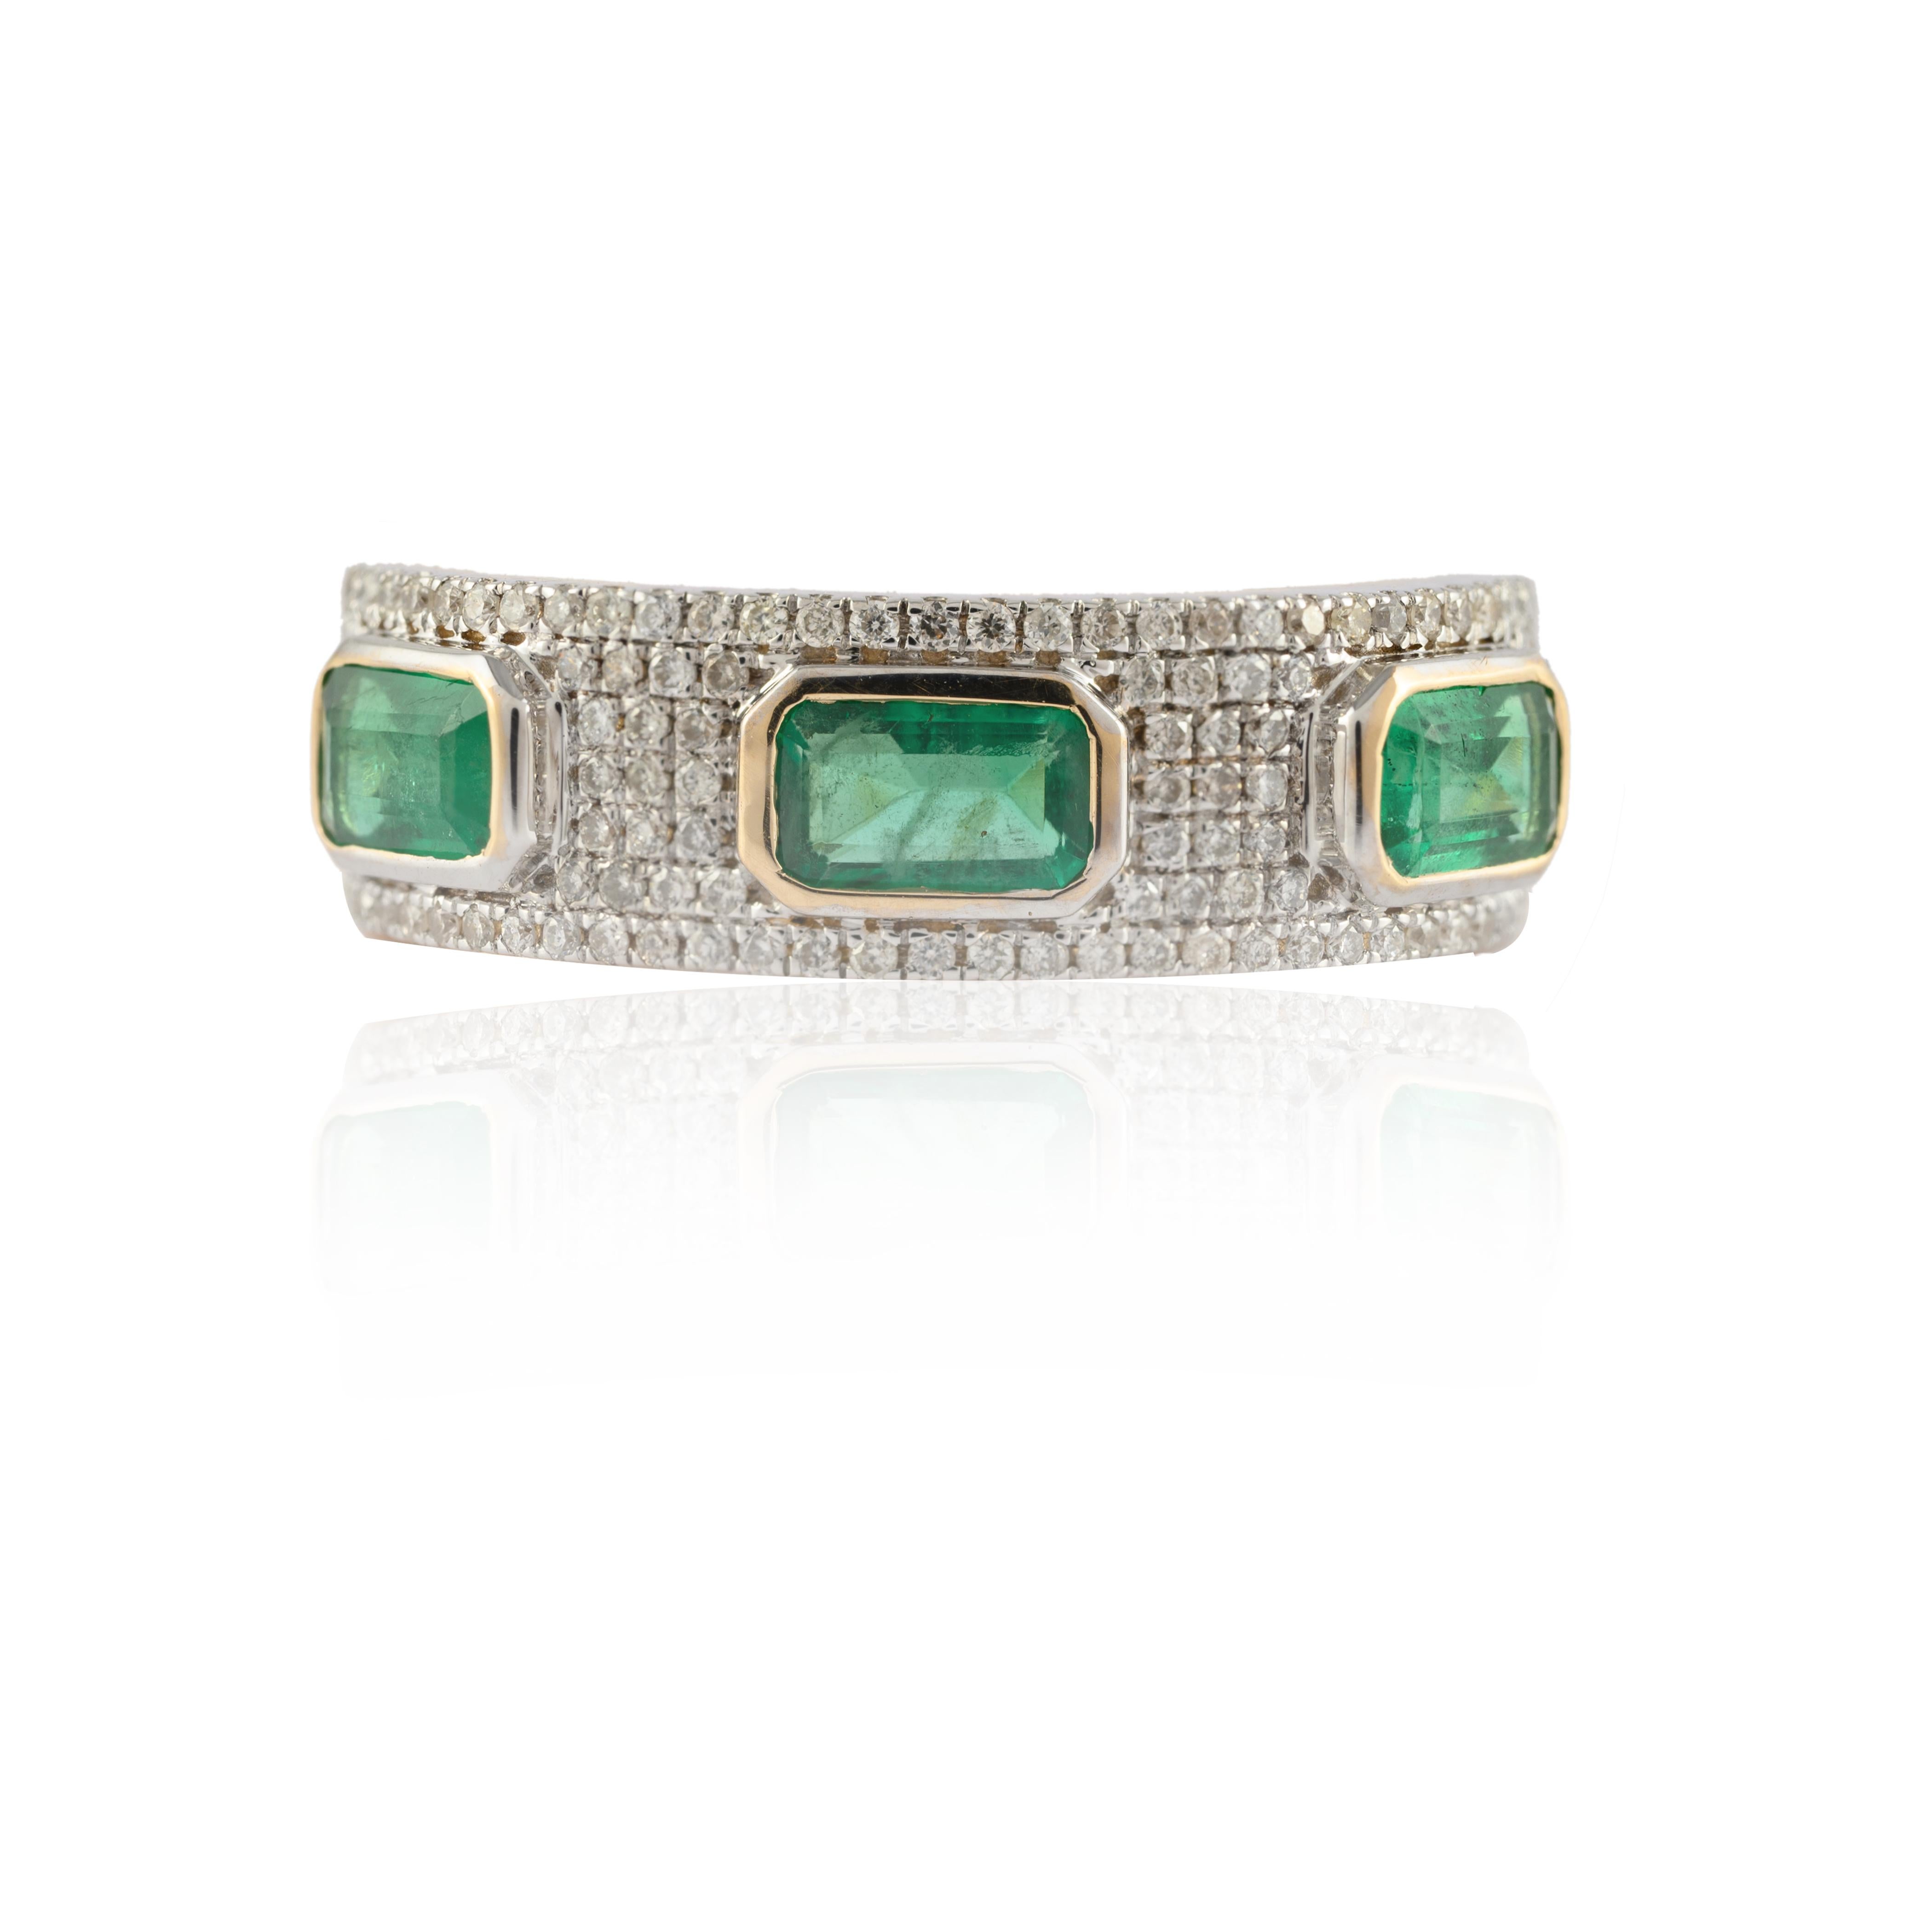 For Sale:  Impeccable Three Stone Emerald and Diamond Engagement Ring in 14k Yellow Gold 2